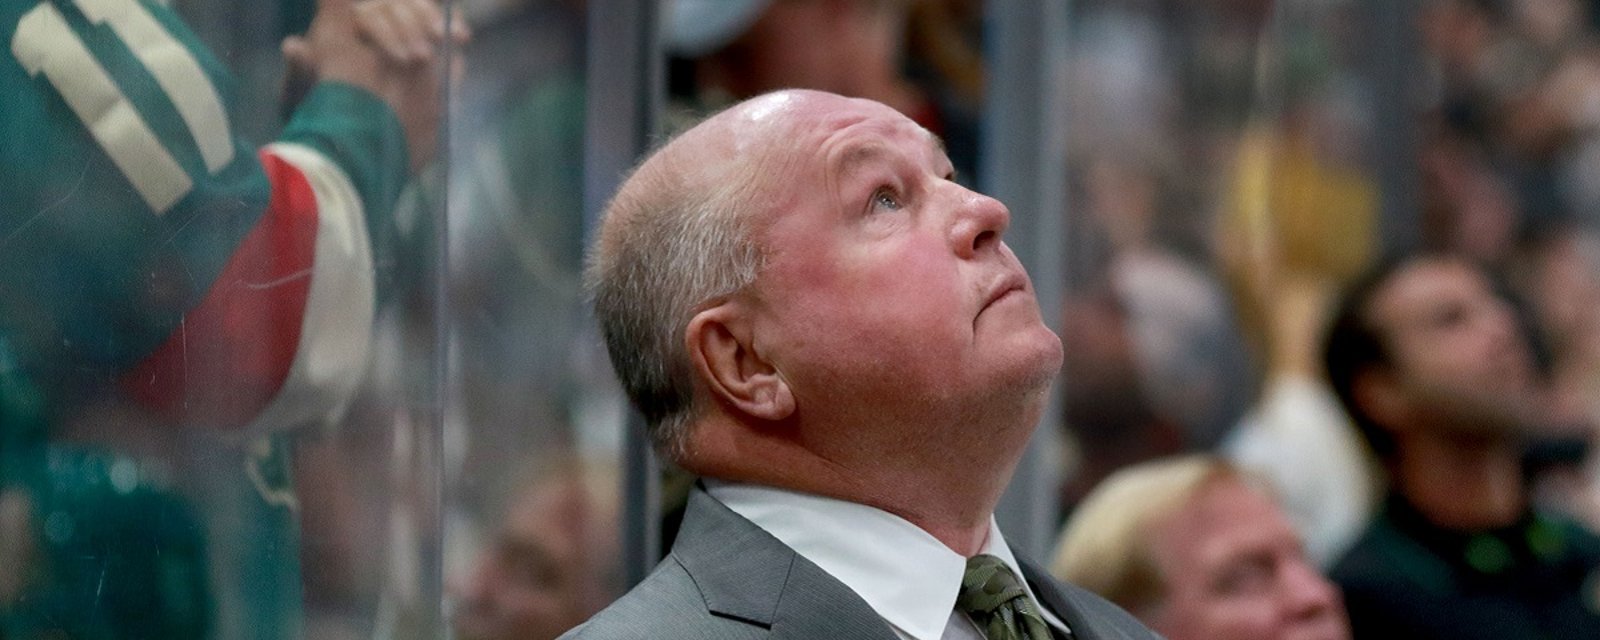 Breaking: Wild head coach makes a very surprising scratch before tonight's game.